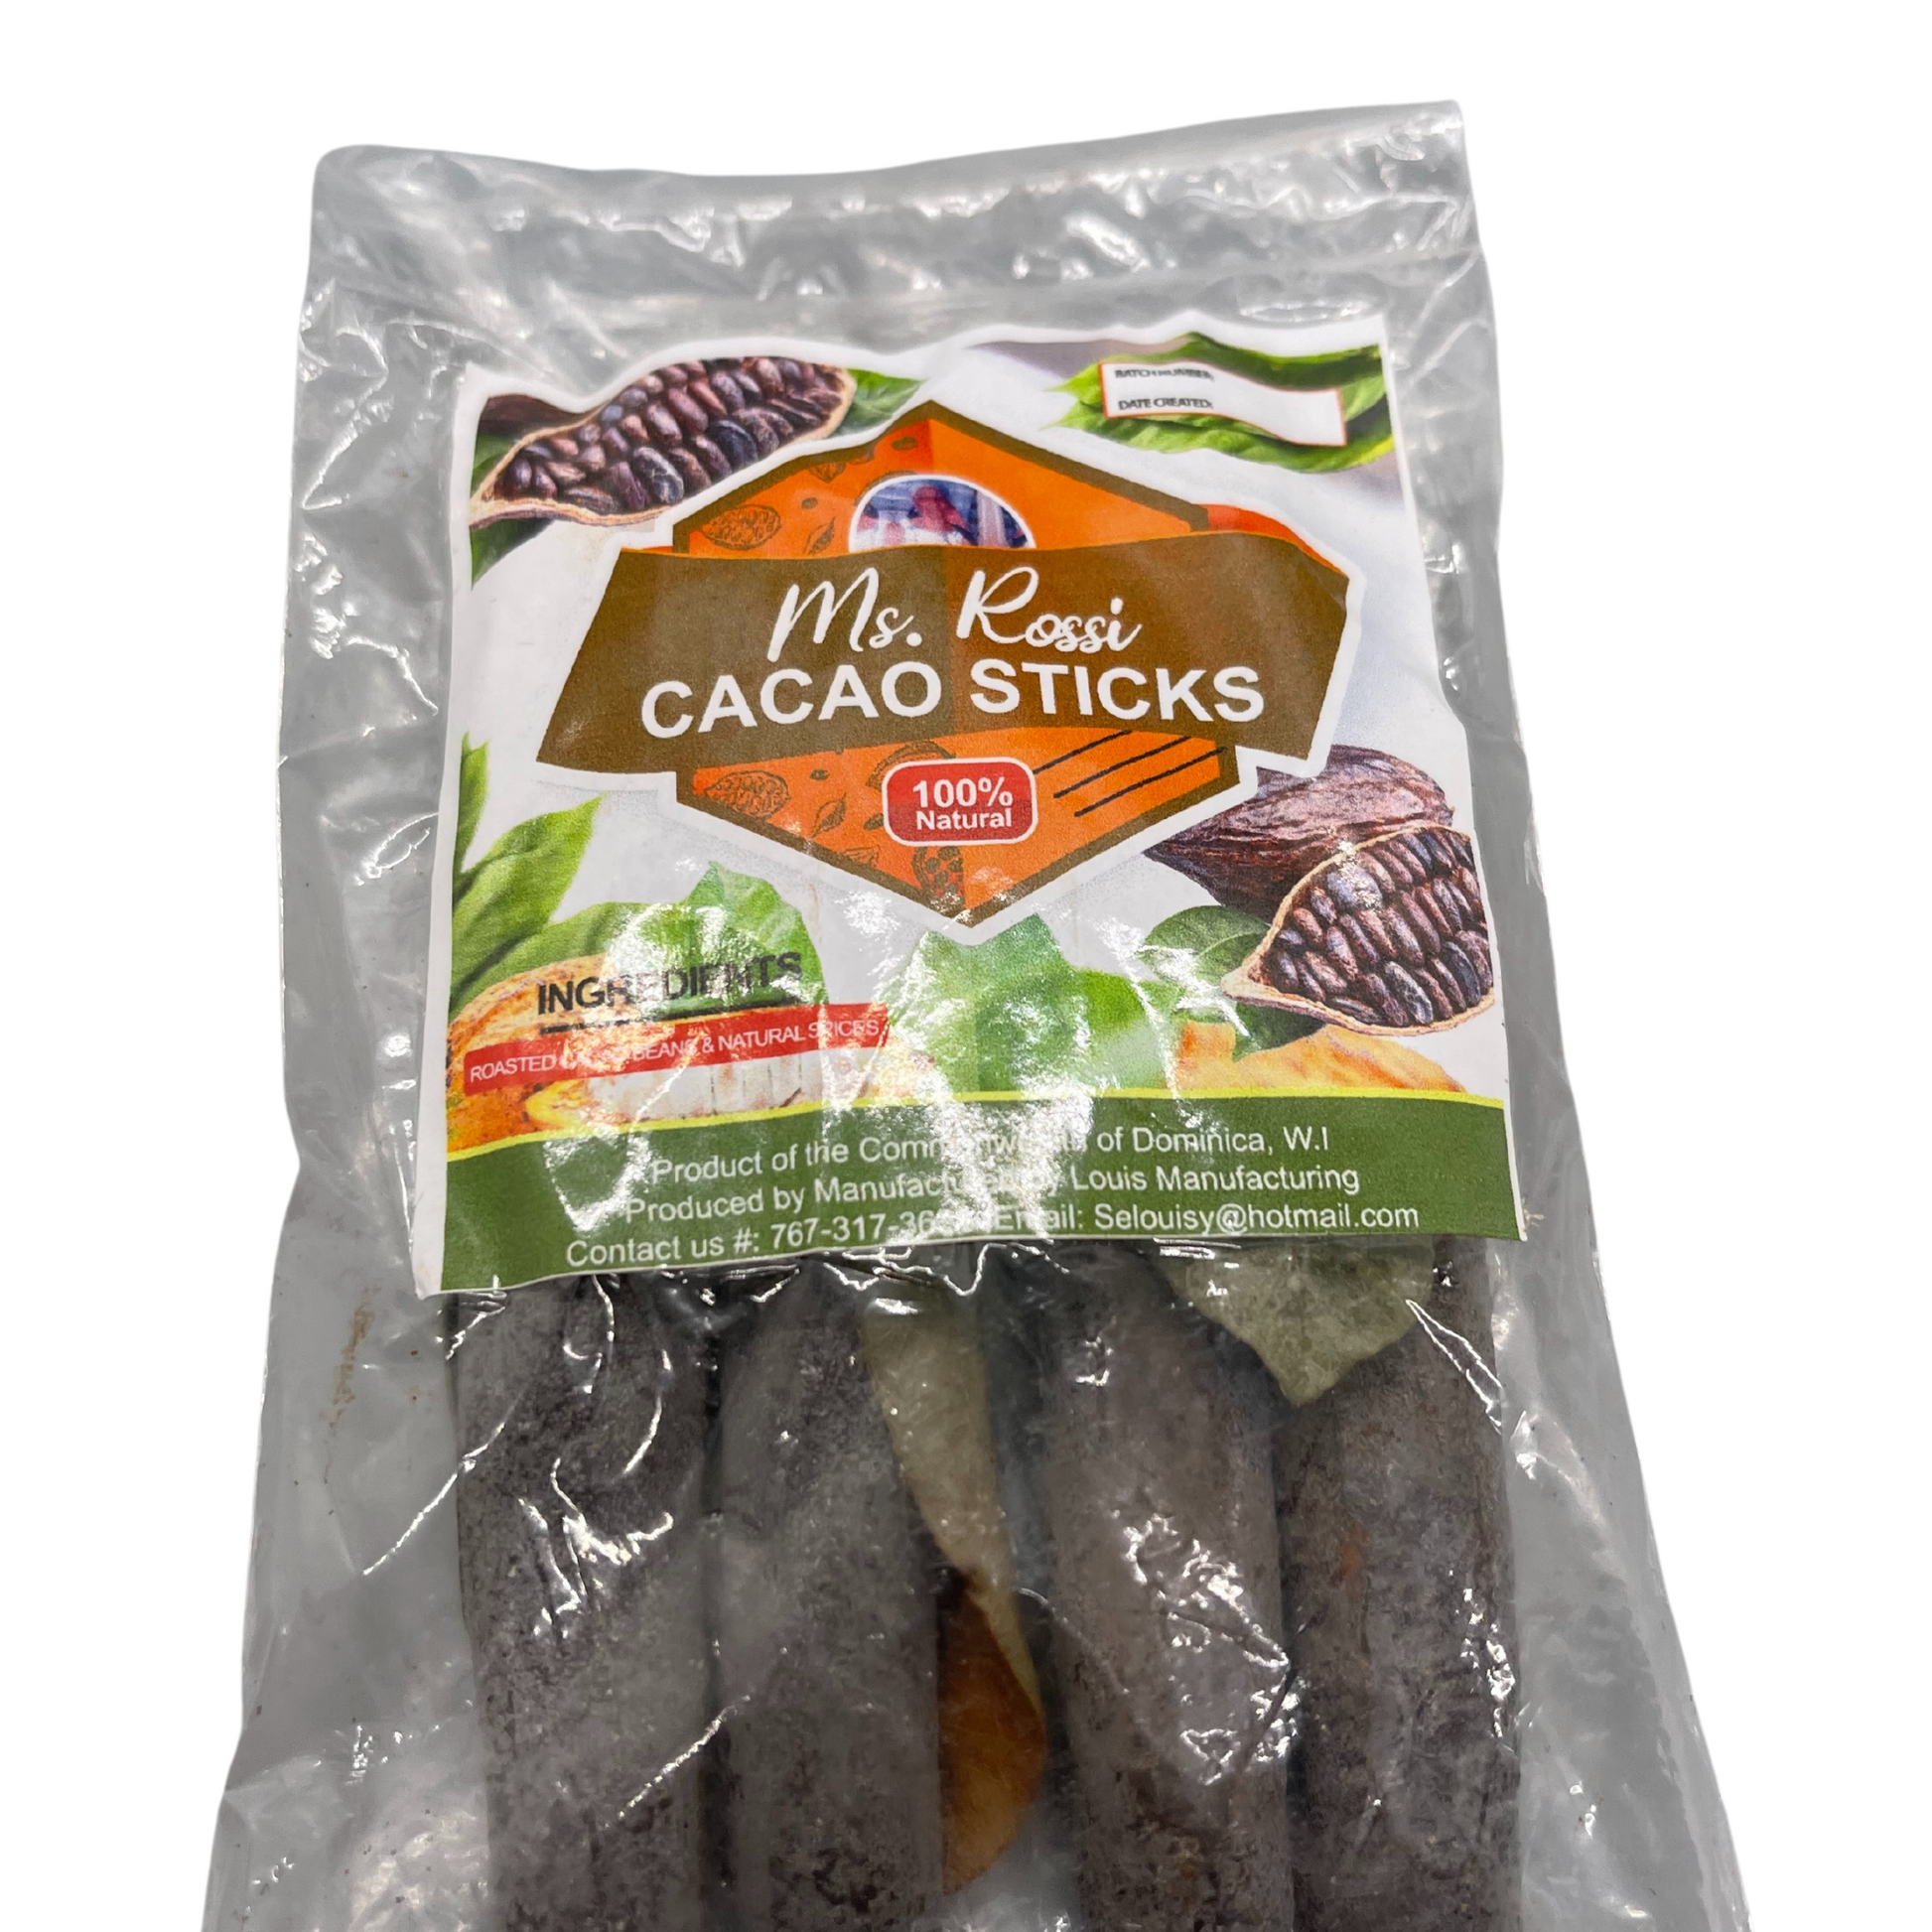 Ms. Rossi Cacao  Sticks  / Louis Manufacturing freeshipping - Buydominicaonline.com